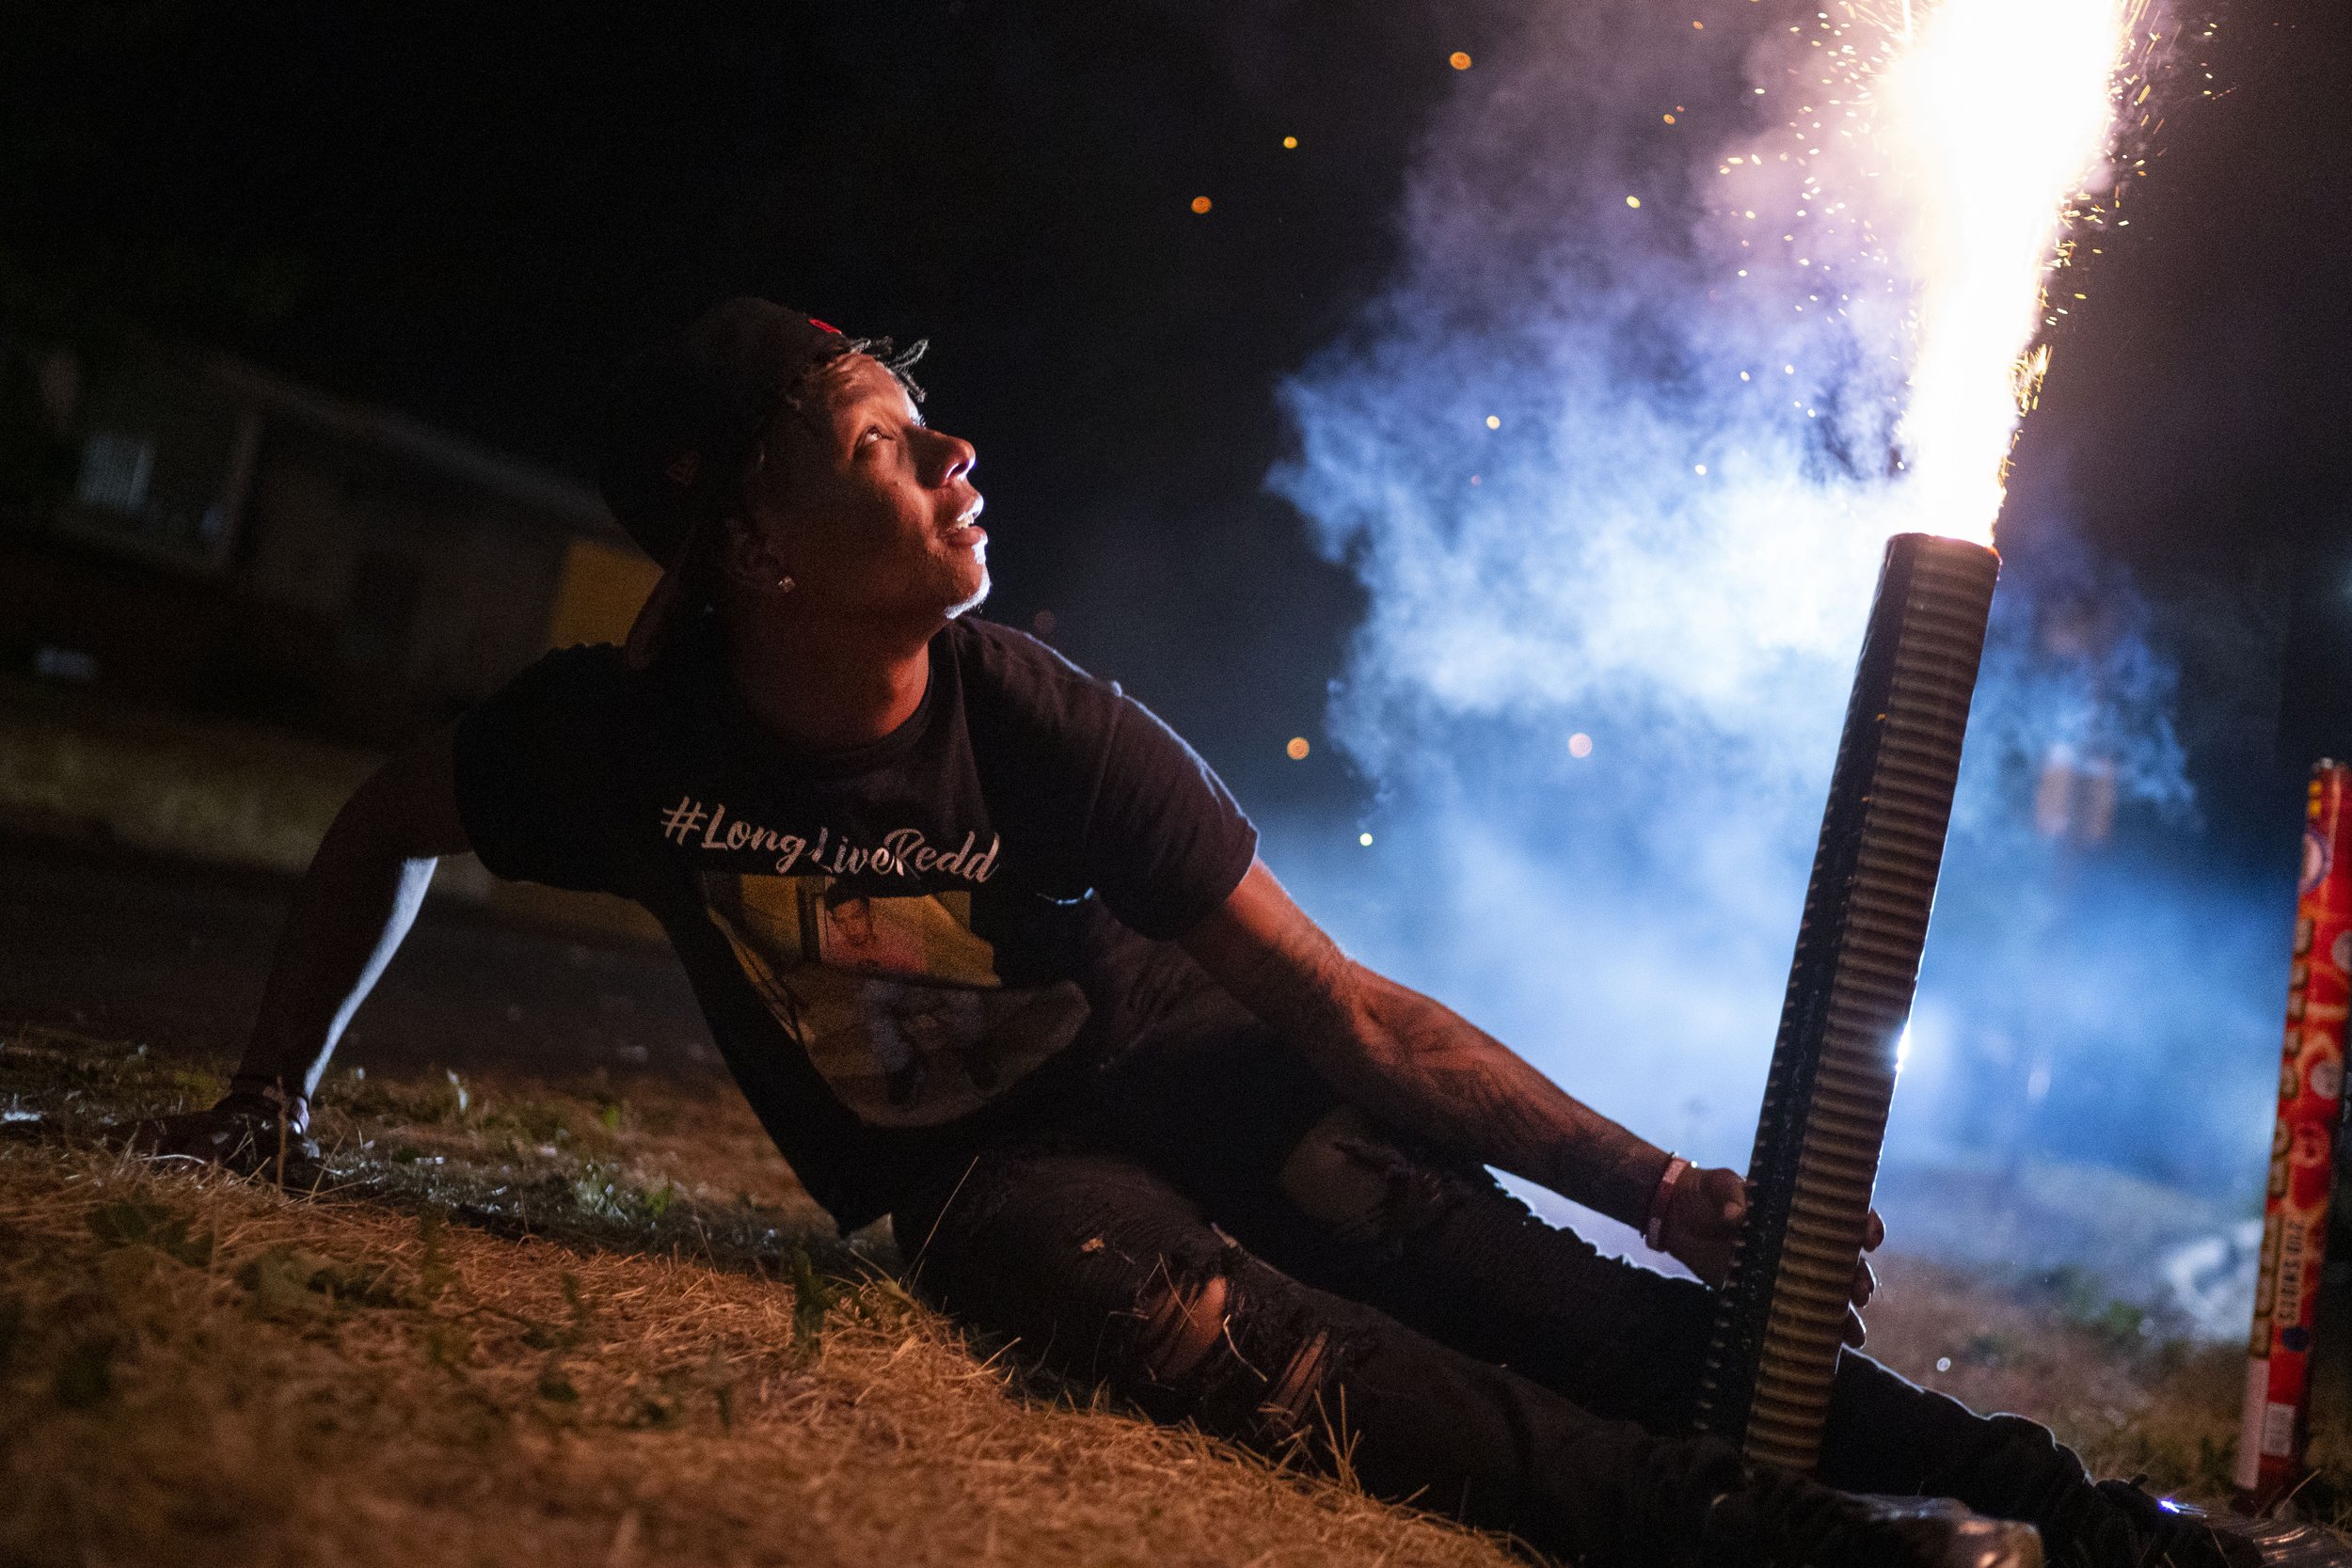  Emajay Driver, best friend of Daunte Wright, holds a firework in place during a Fourth of July celebration in his late friend's honor on Sunday, July 4, 2021, in Brooklyn Center. Wright was killed by former Brooklyn Center police officer Kimberly Po